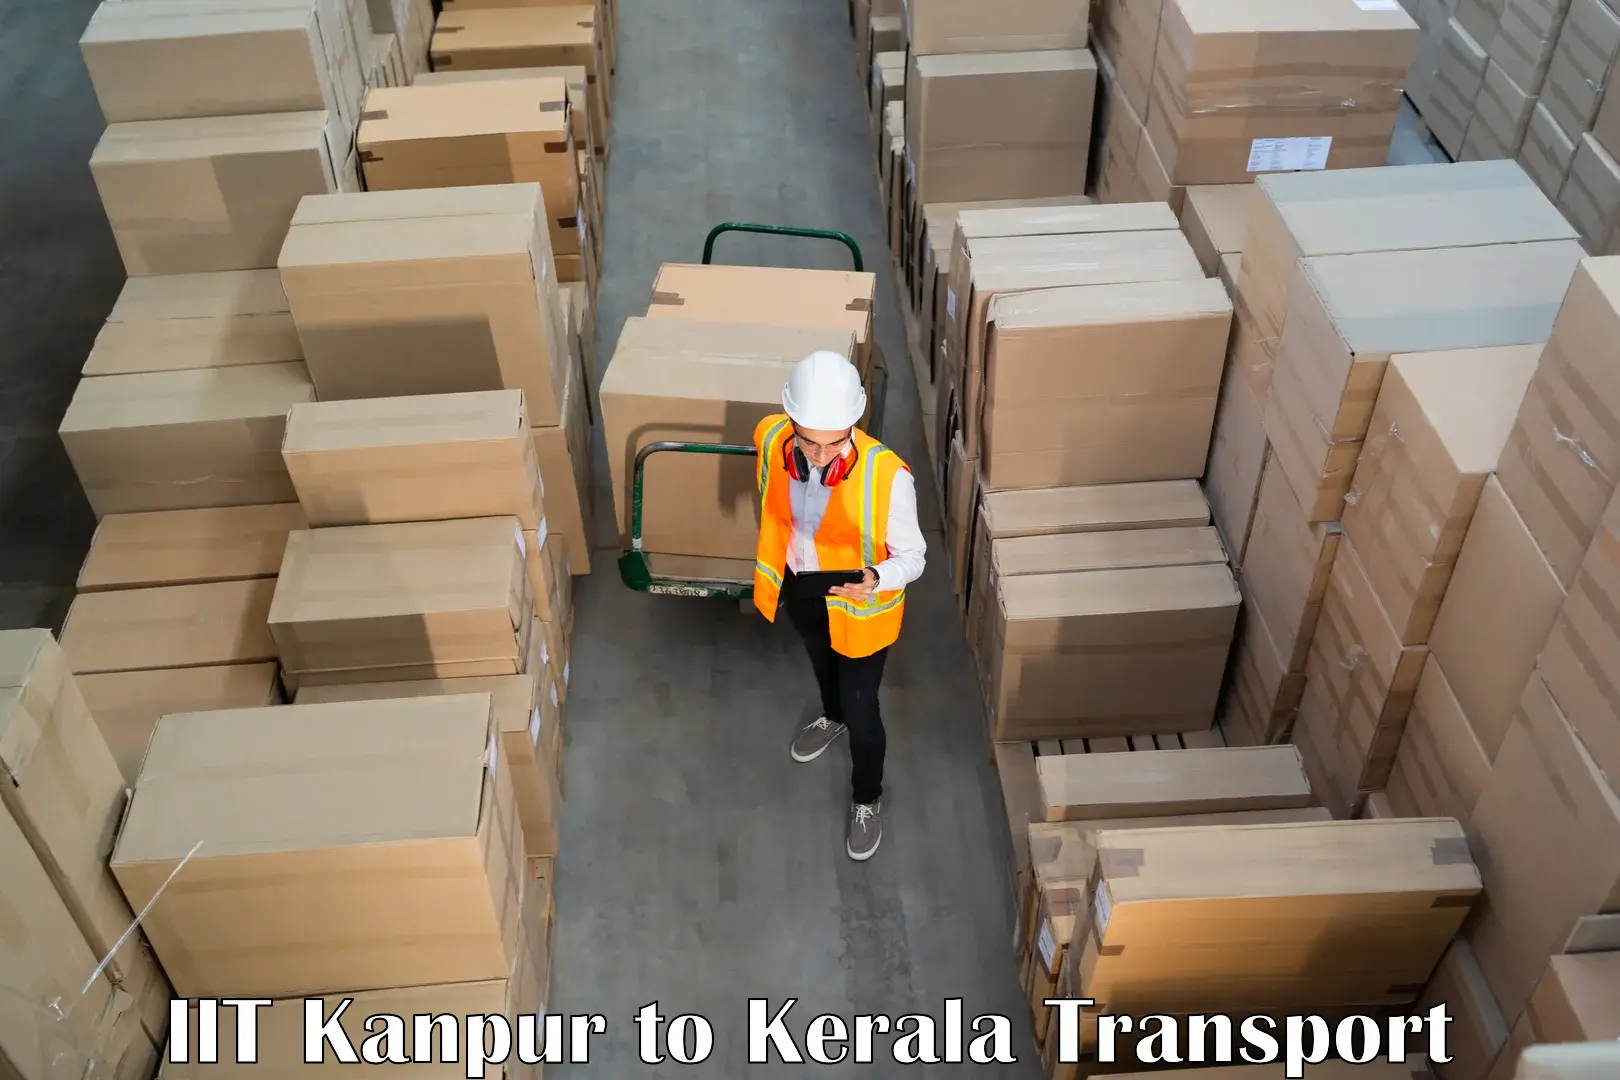 Delivery service IIT Kanpur to Kerala